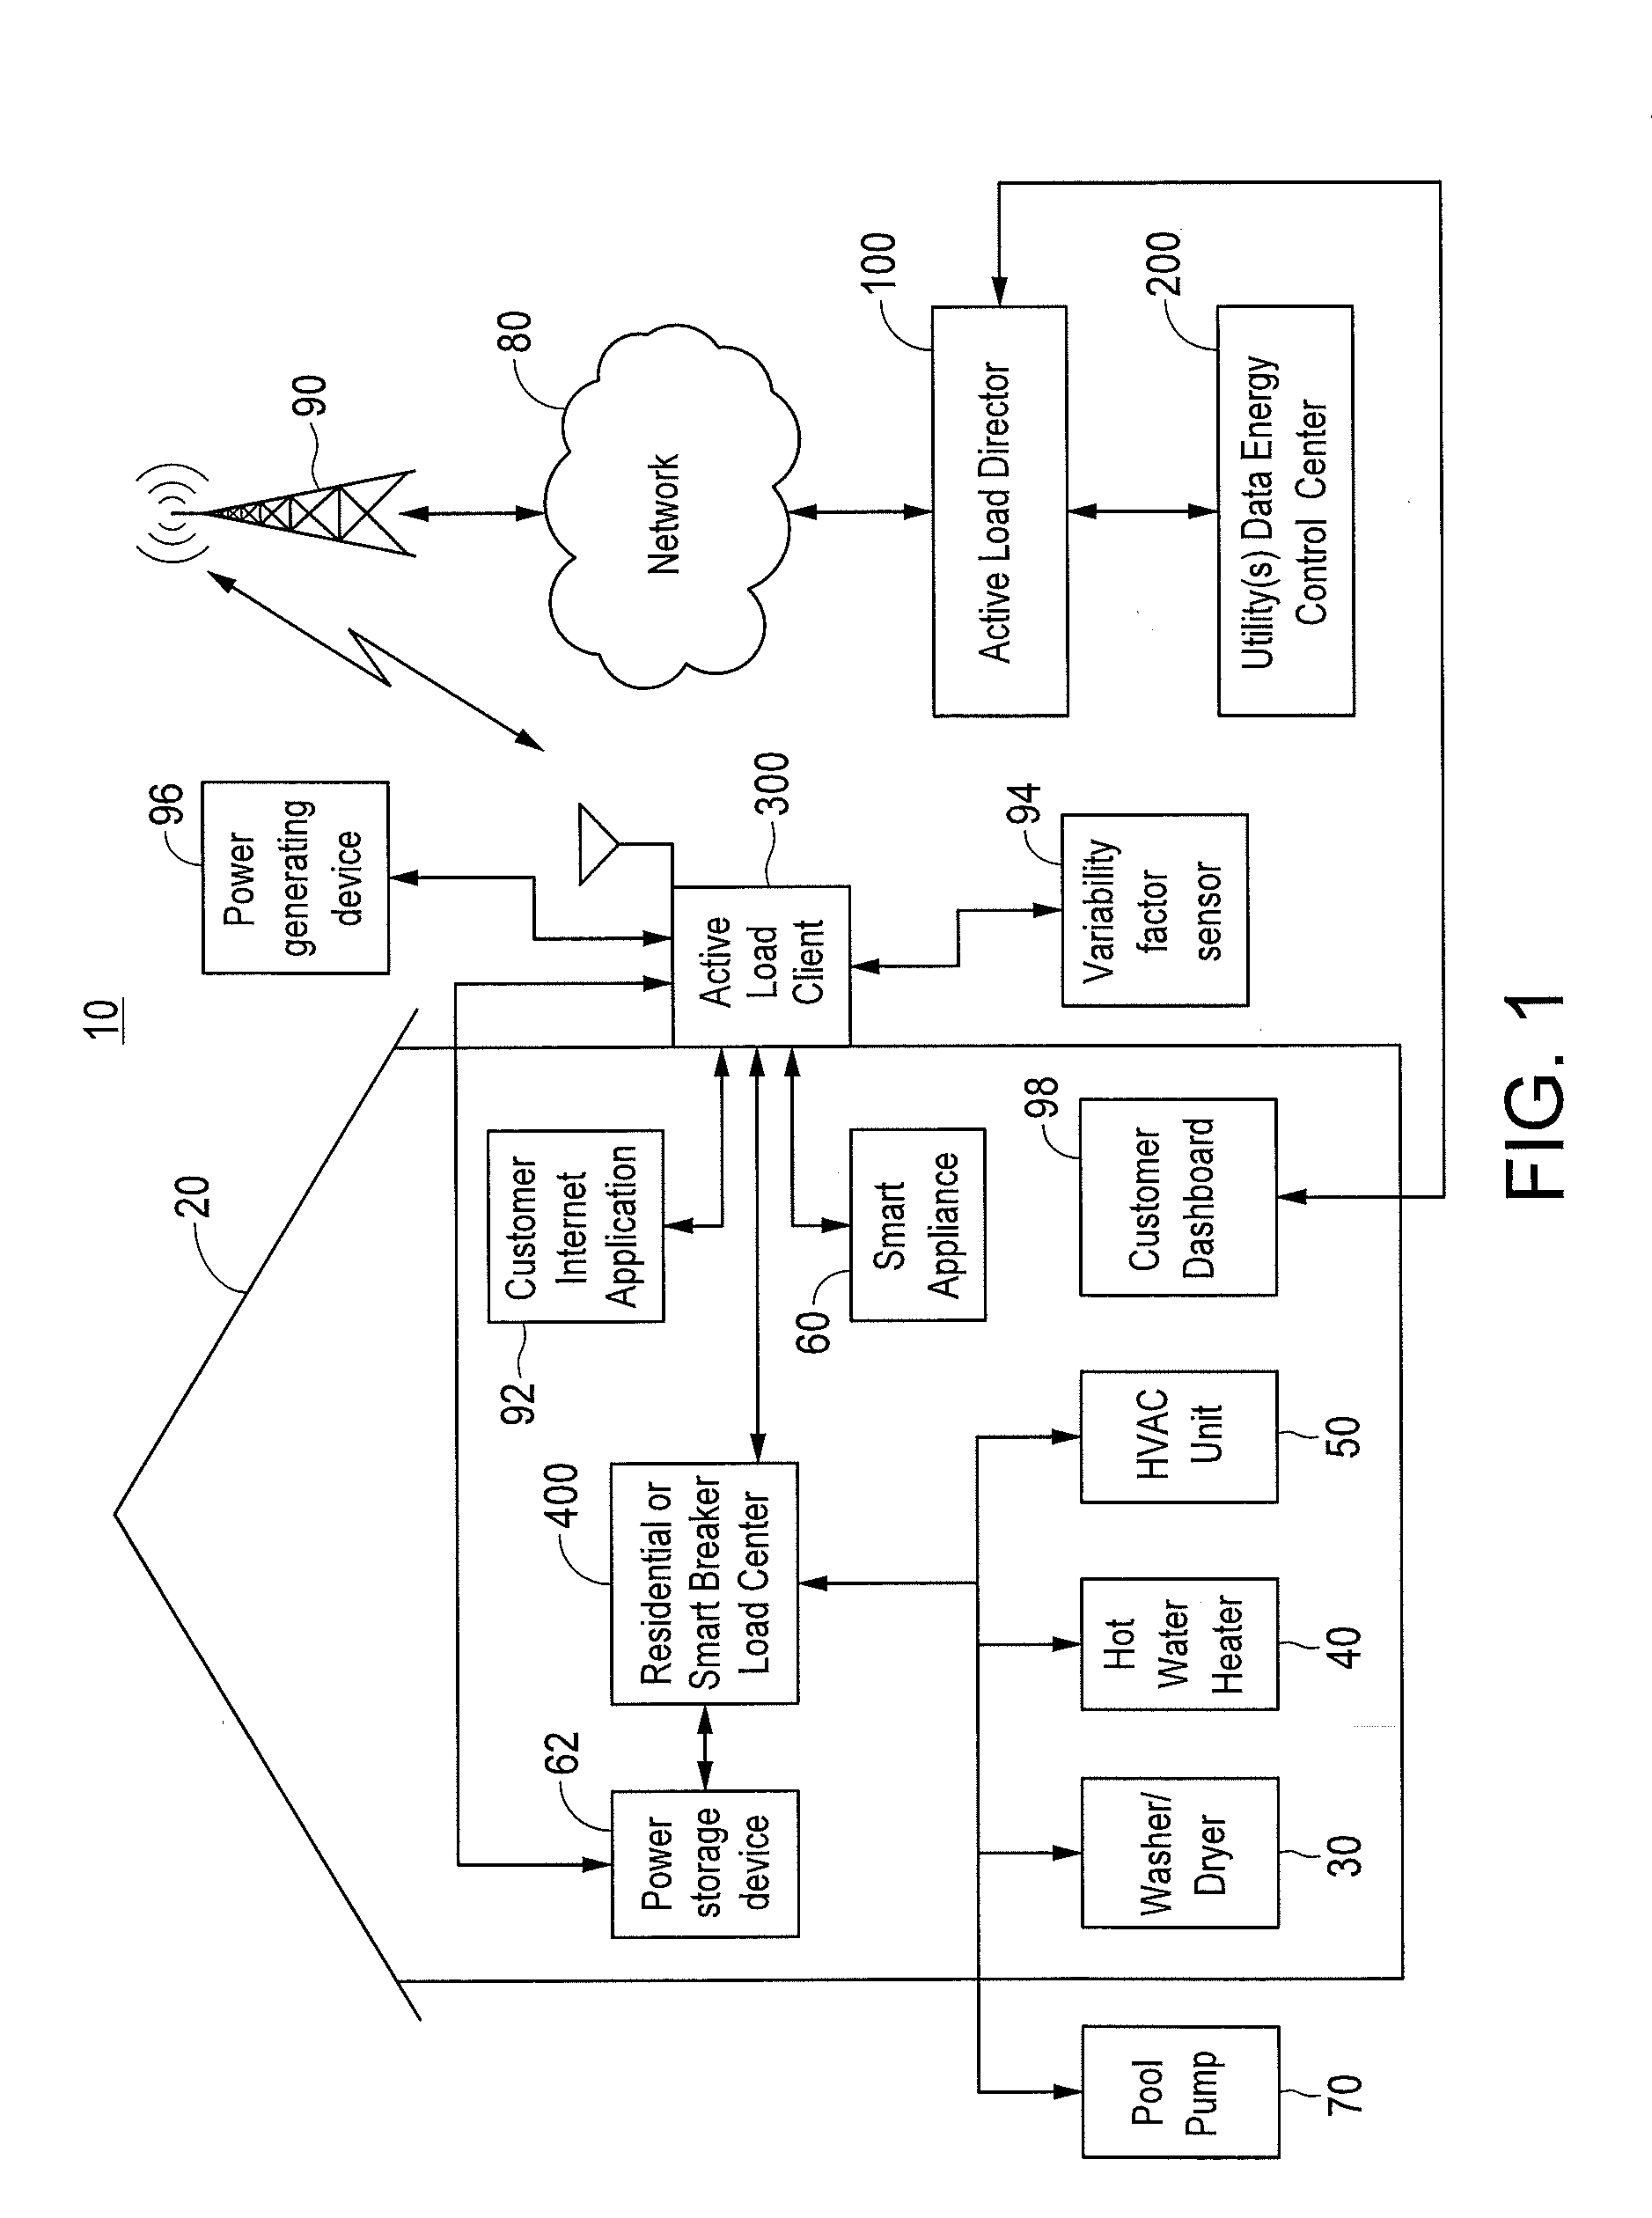 Method and Apparatus for Actively Managing Consumption of Electric Power Supplied by One or More Electric Utilities